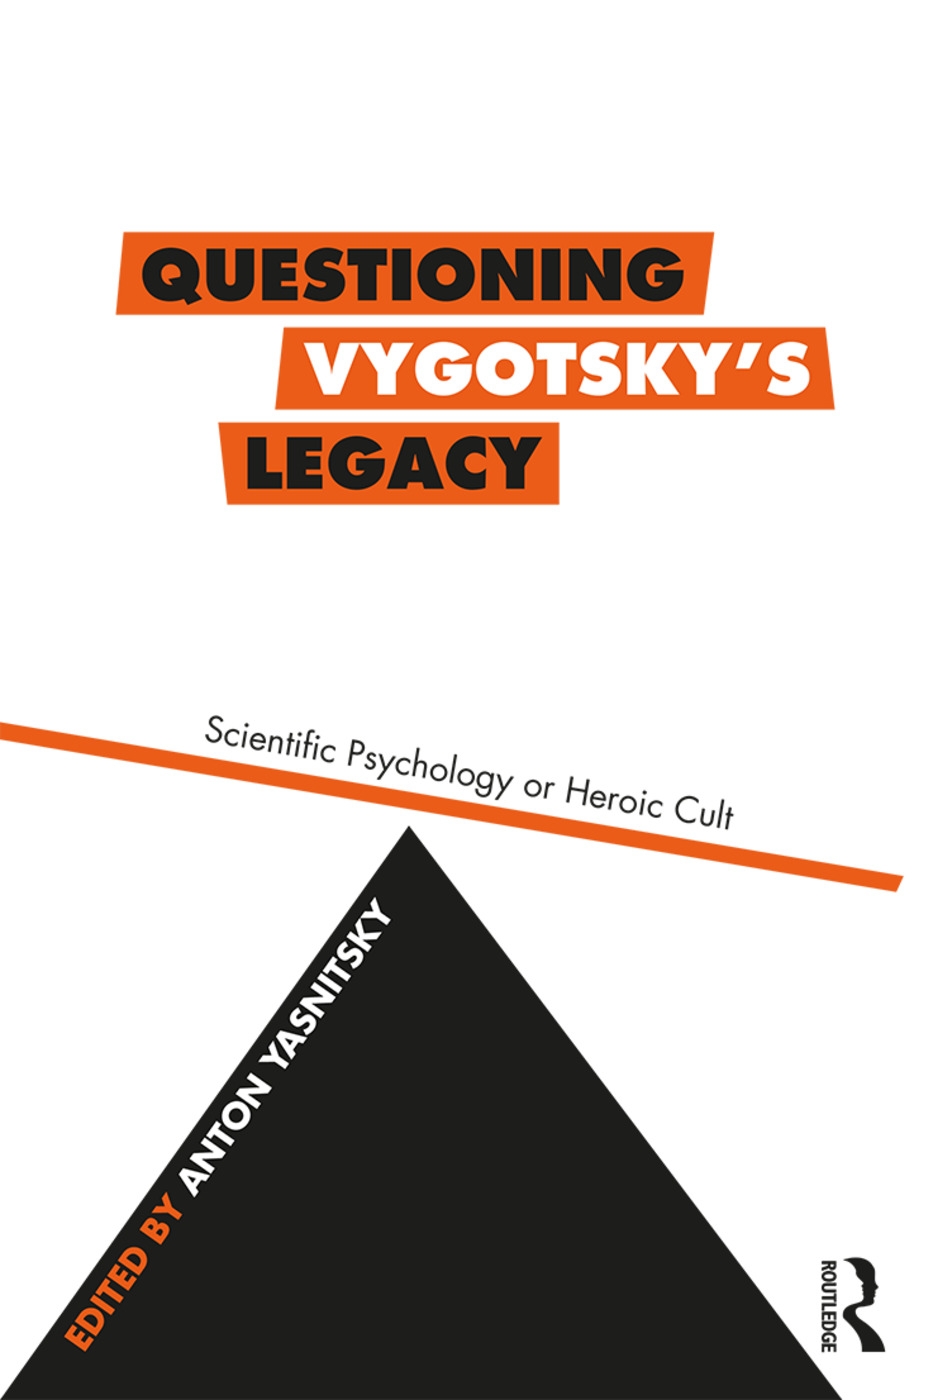 Questioning Vygotsky’s Legacy: Scientific Psychology or Heroic Cult